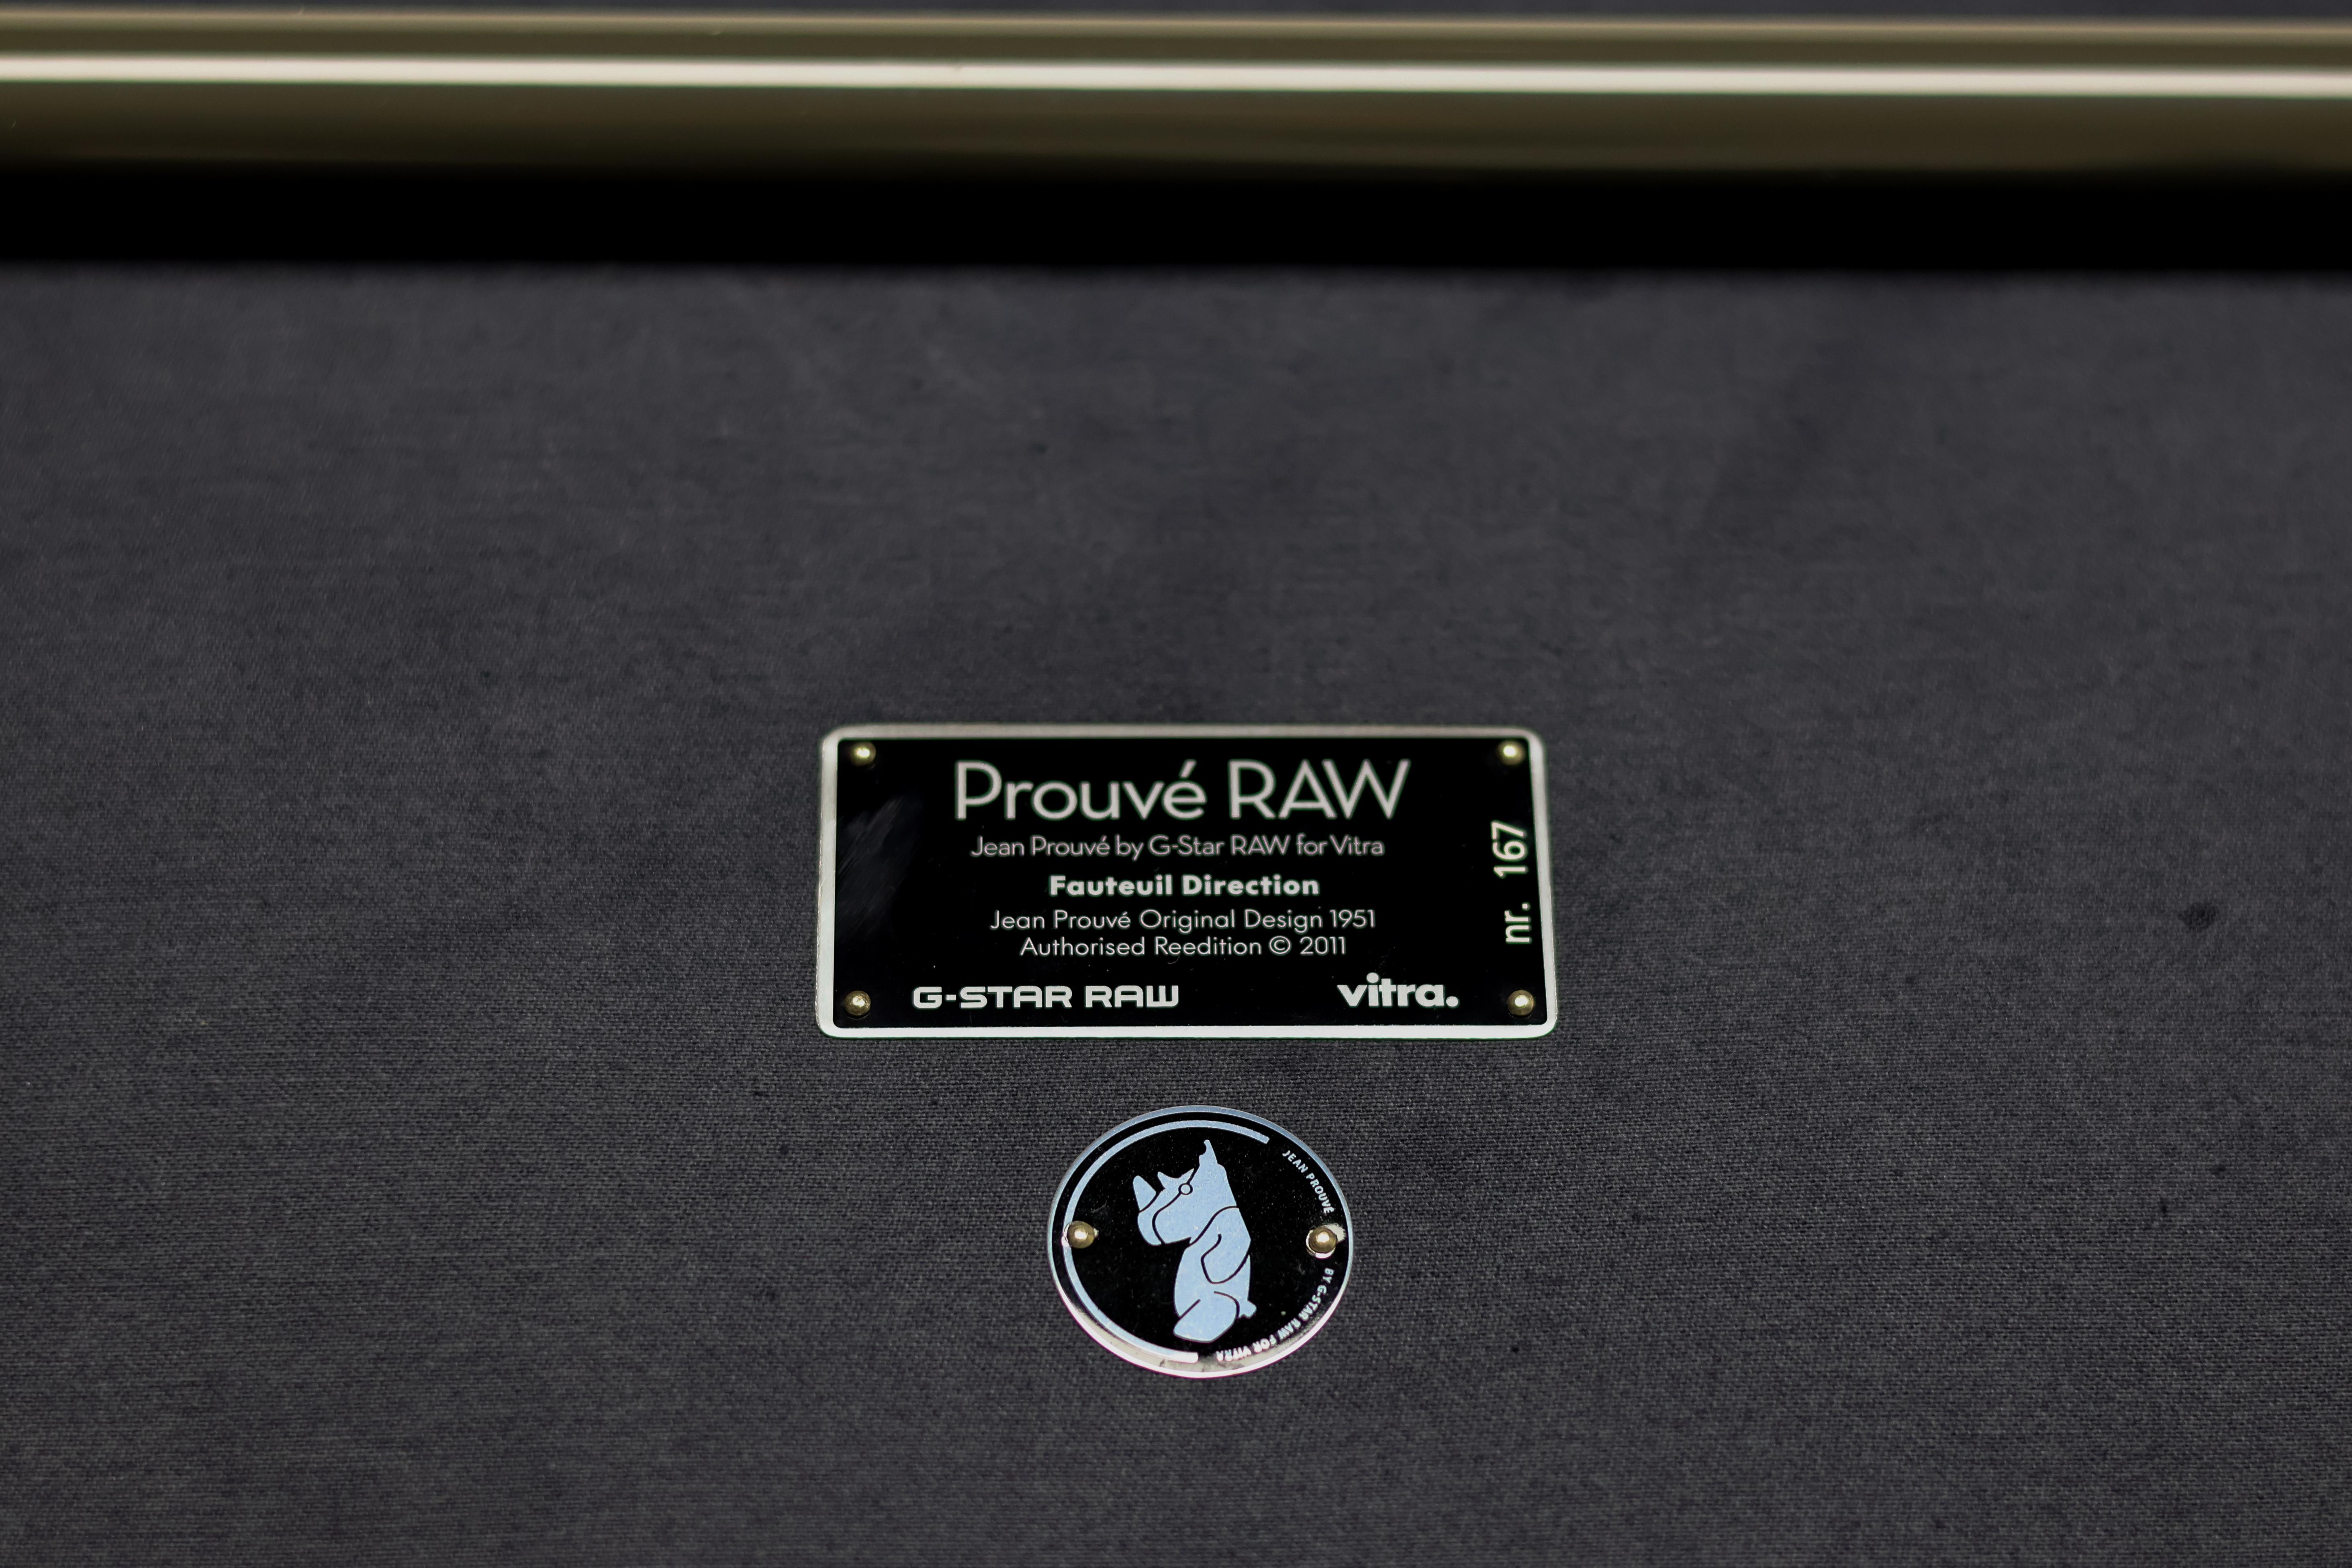 Jean Prouvé Fauteuil Direction RAW Limited Edition 4